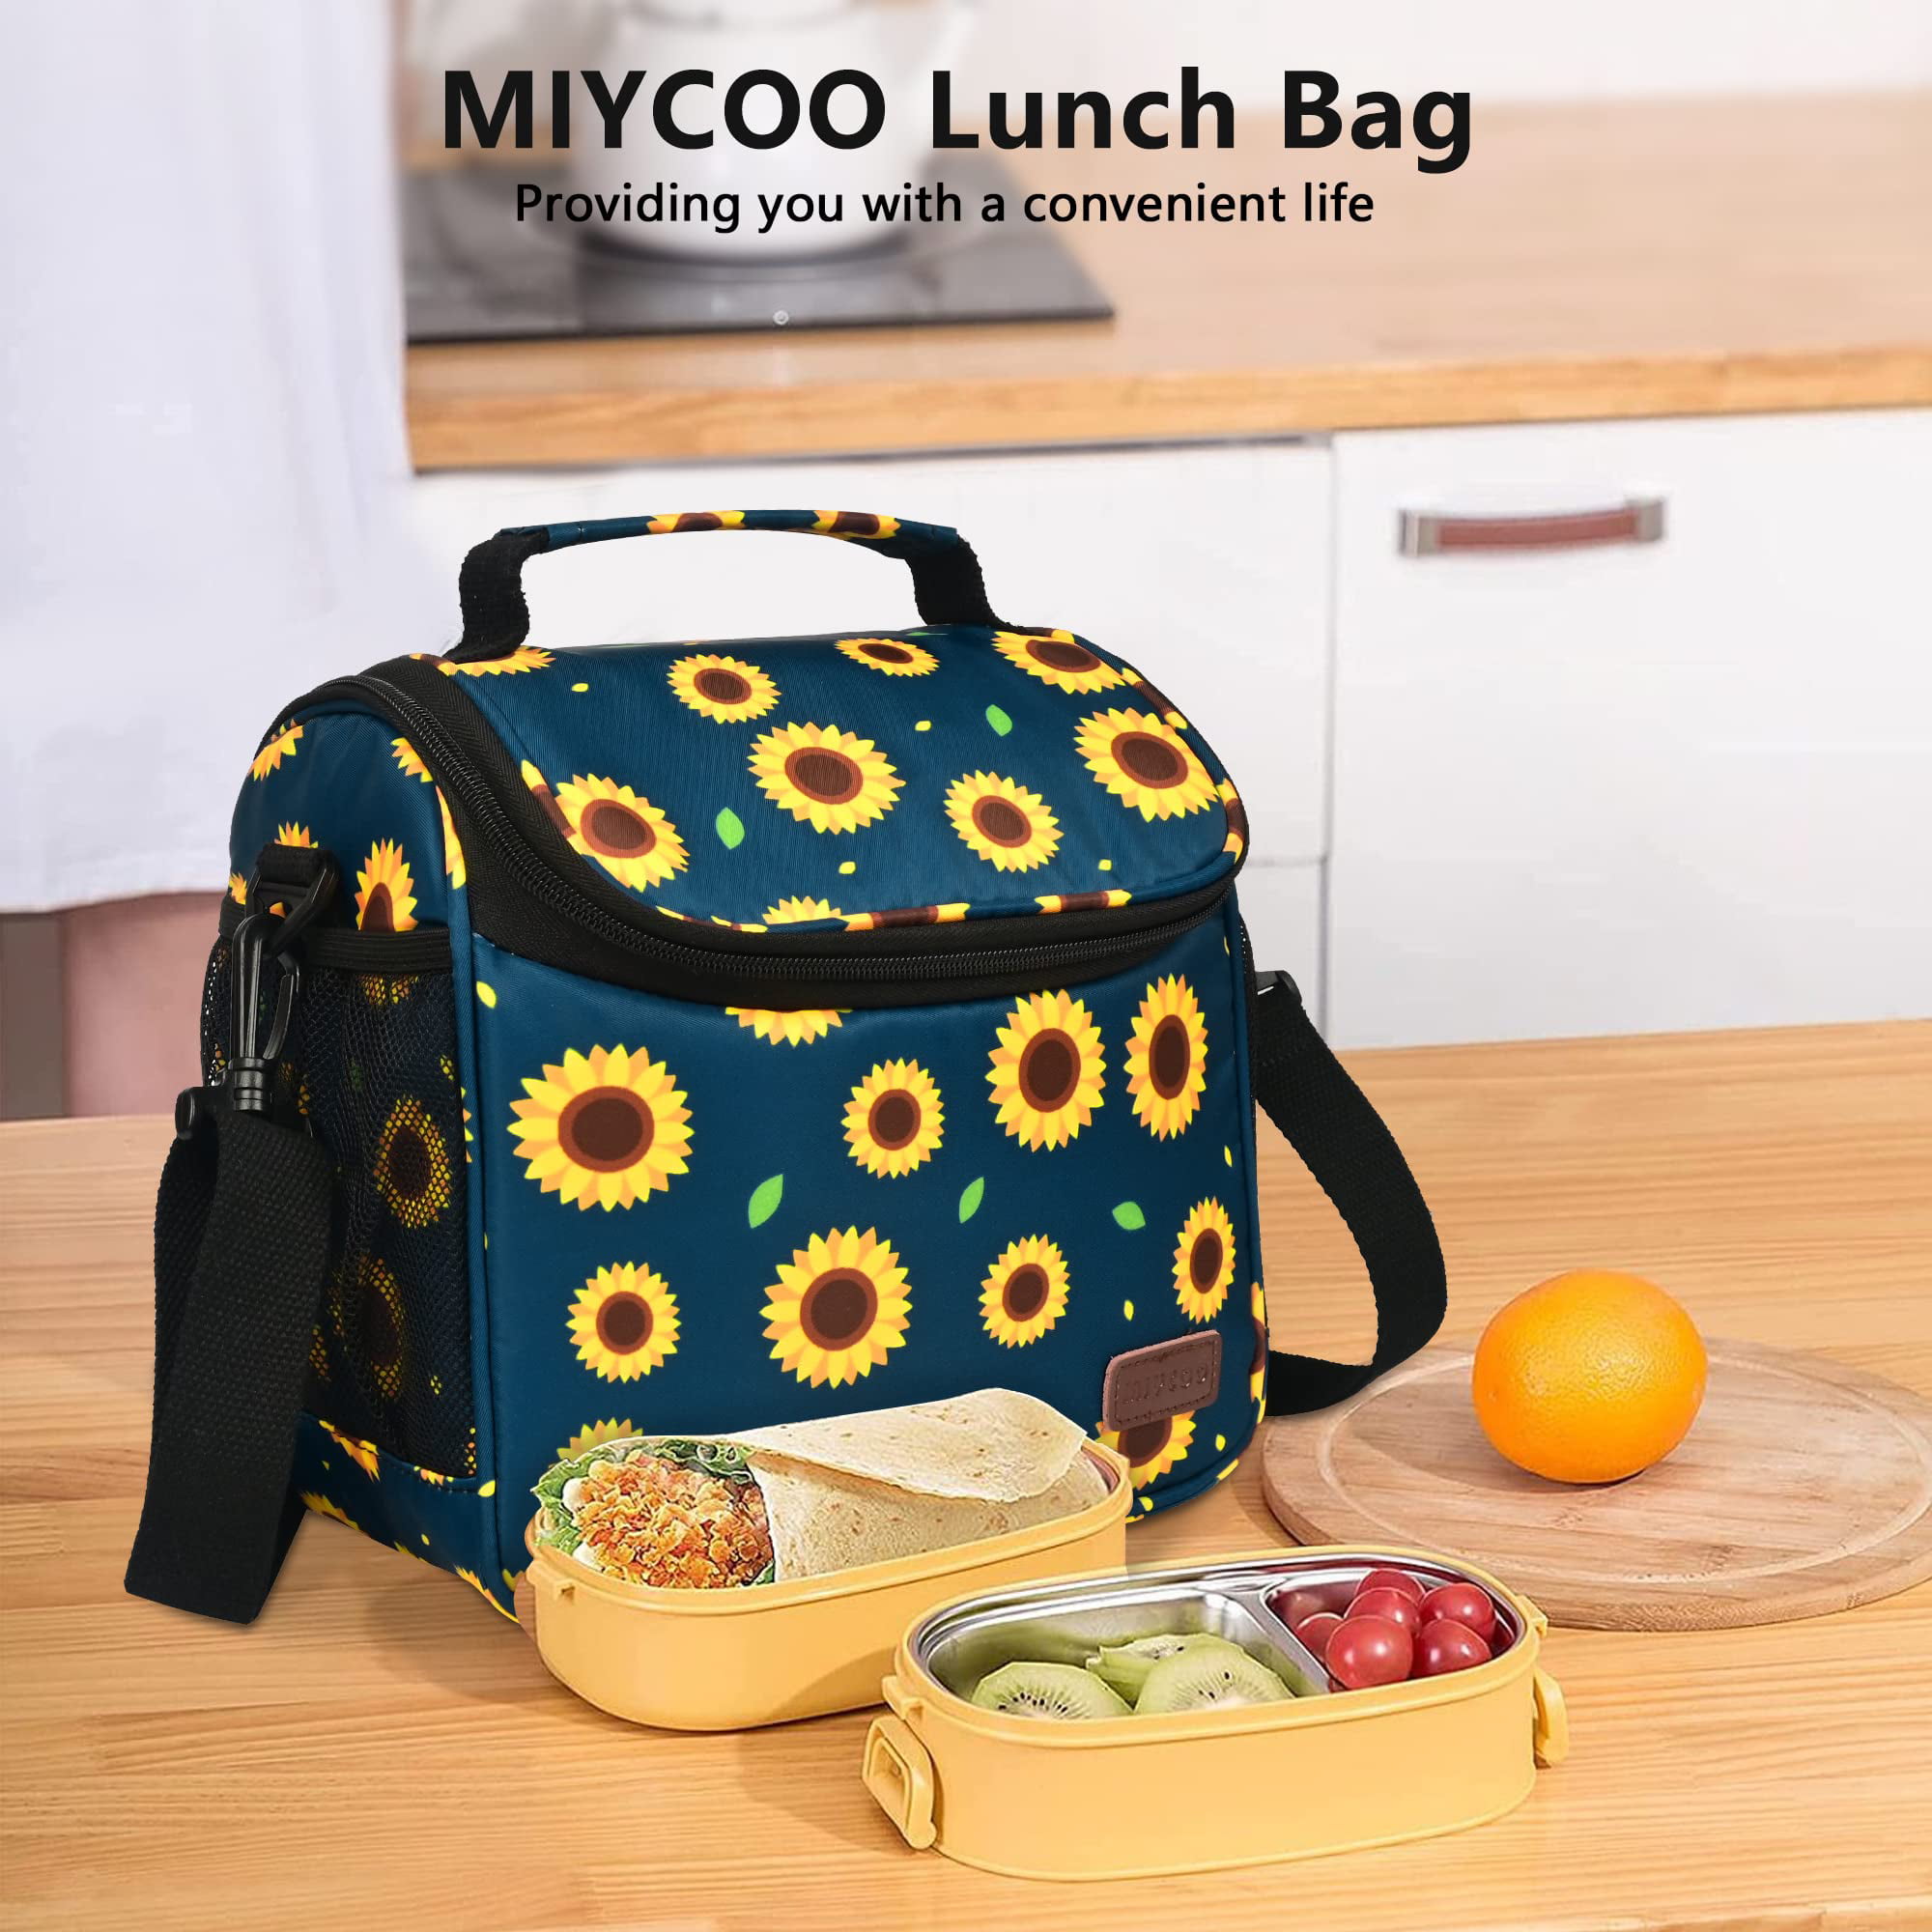 Kids' Lunch Bag With Water Bottle By ToyToEnjoy- Insulated Lunch